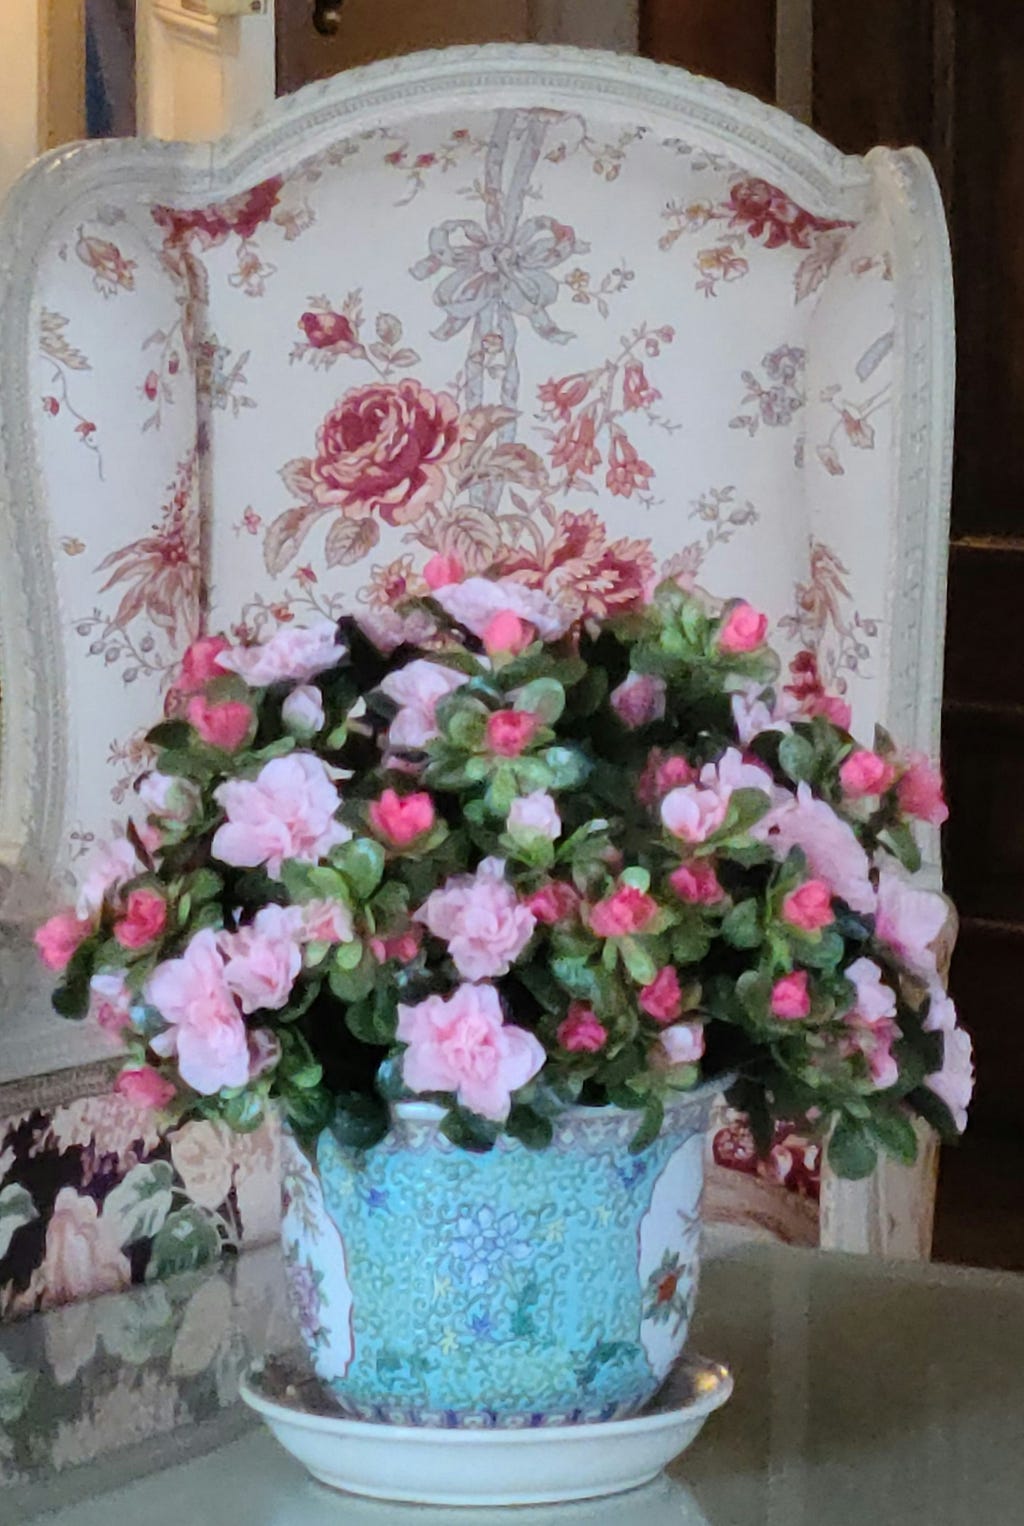 A table arrangement of flowers in various shades of pink in a blue vase on a table with a high backed chair with a floral pattern in rose and pink.